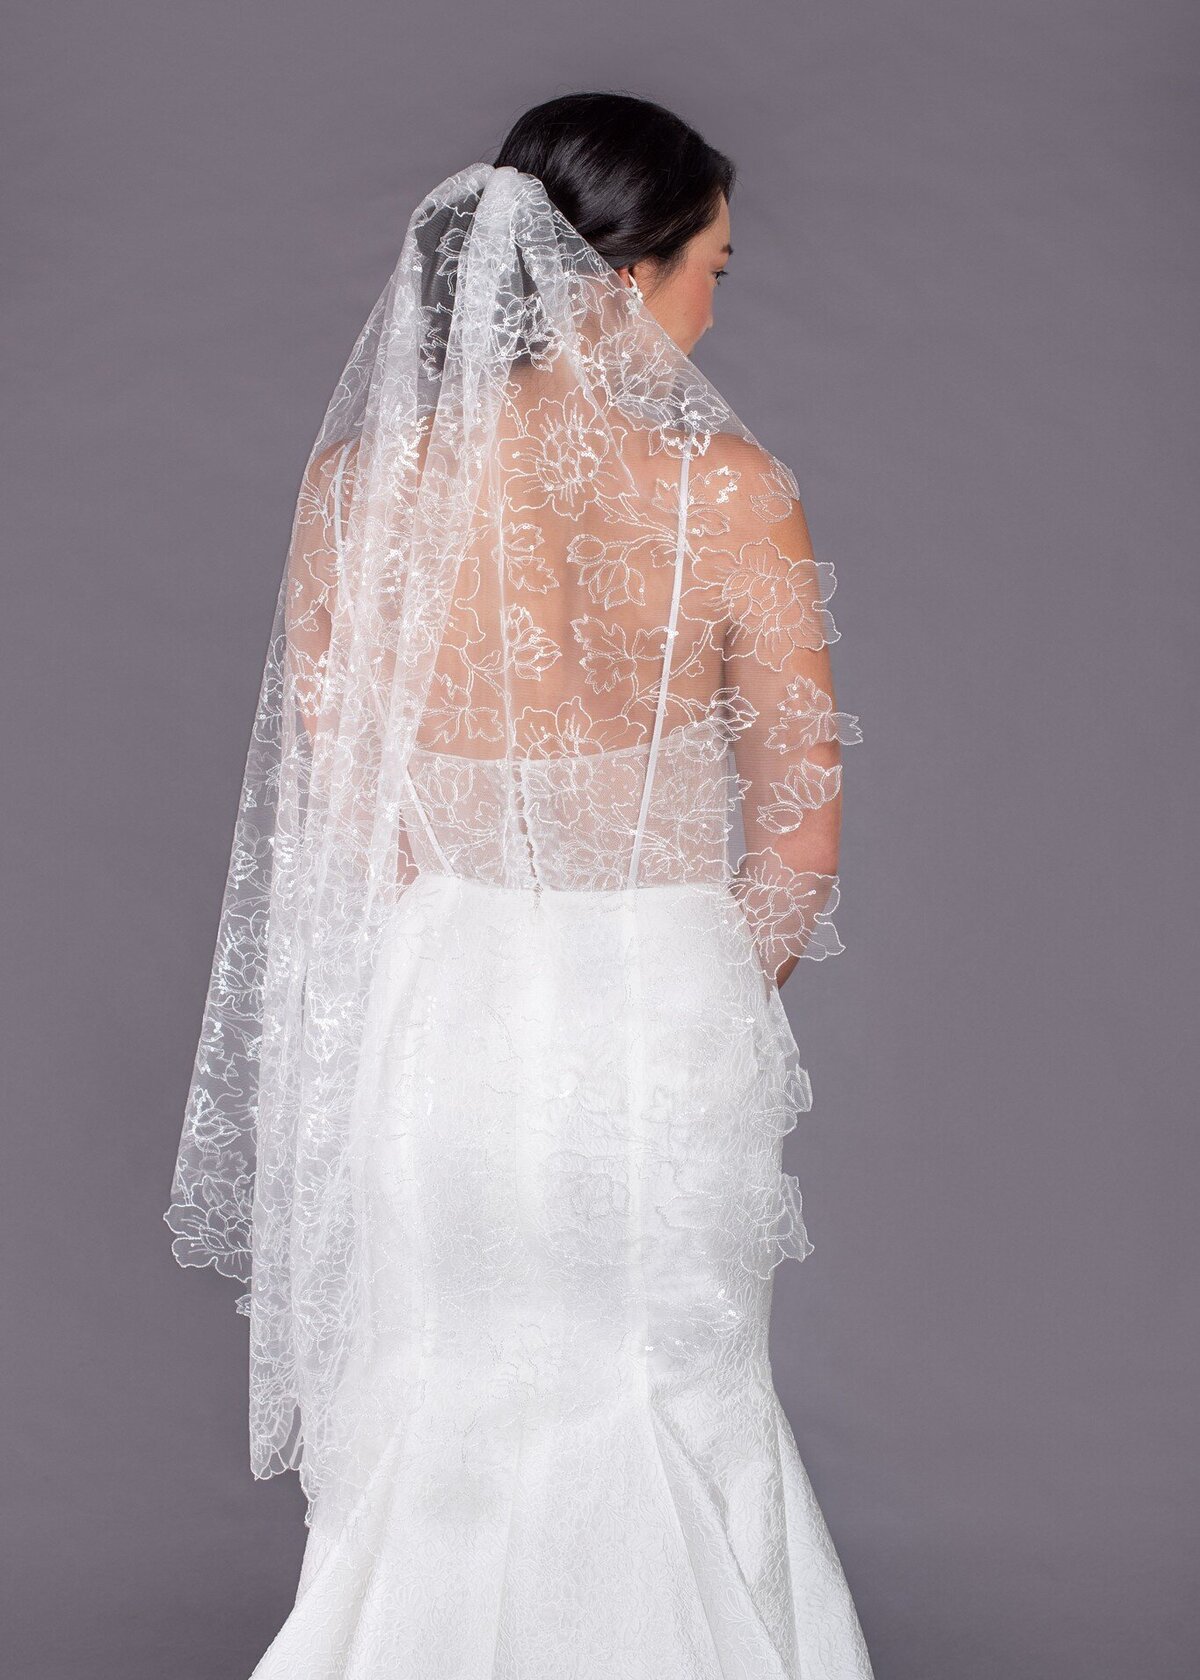 The organic cut edge of the Lilies Veil follows the pattern of the sequin and flower embroidered pattern of the tulle. The top edge is gathered onto a comb for wearing.